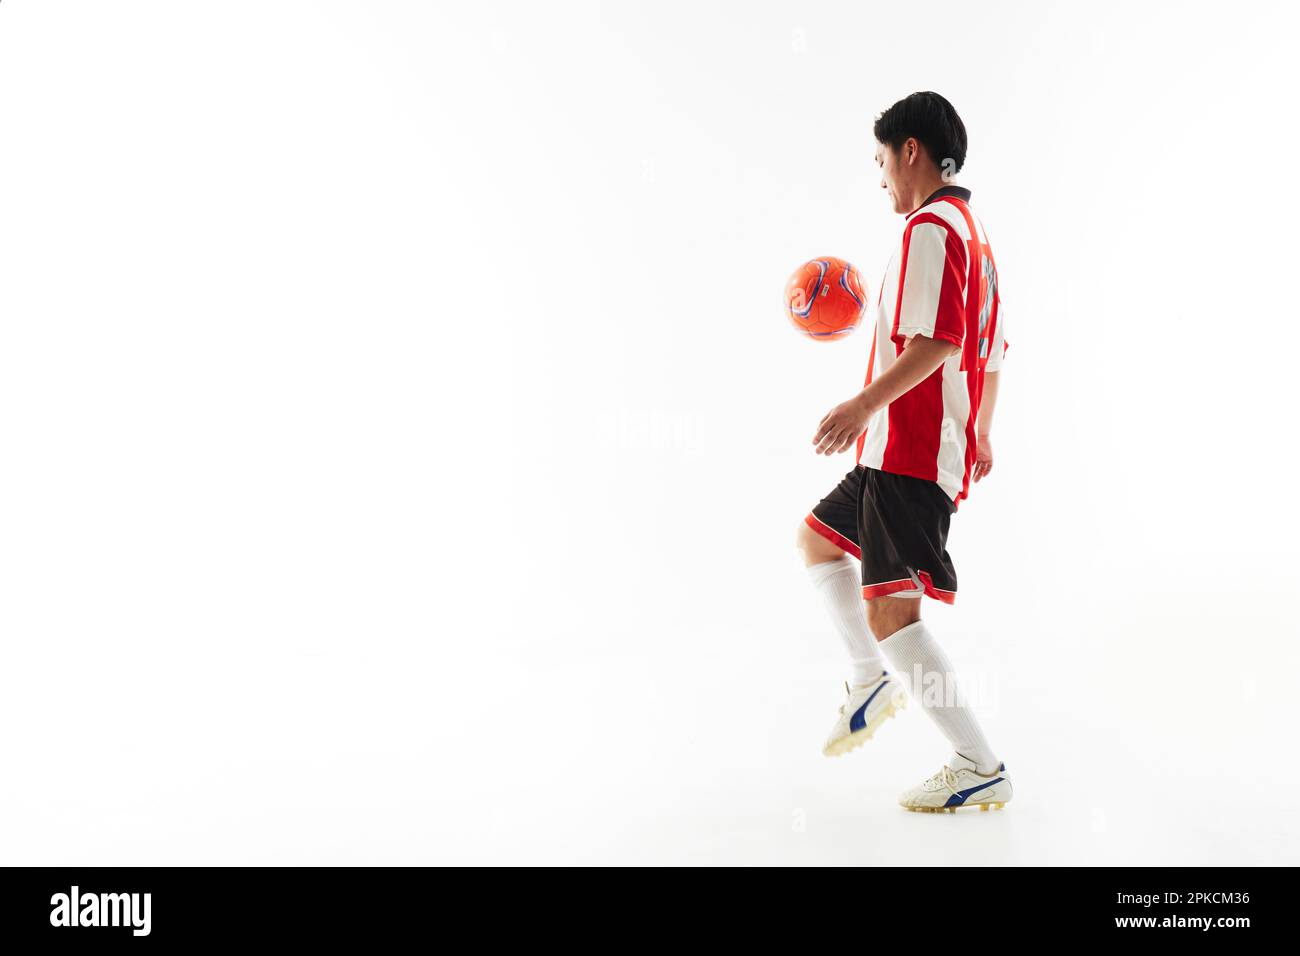 Soccer player lifting a ball Stock Photo